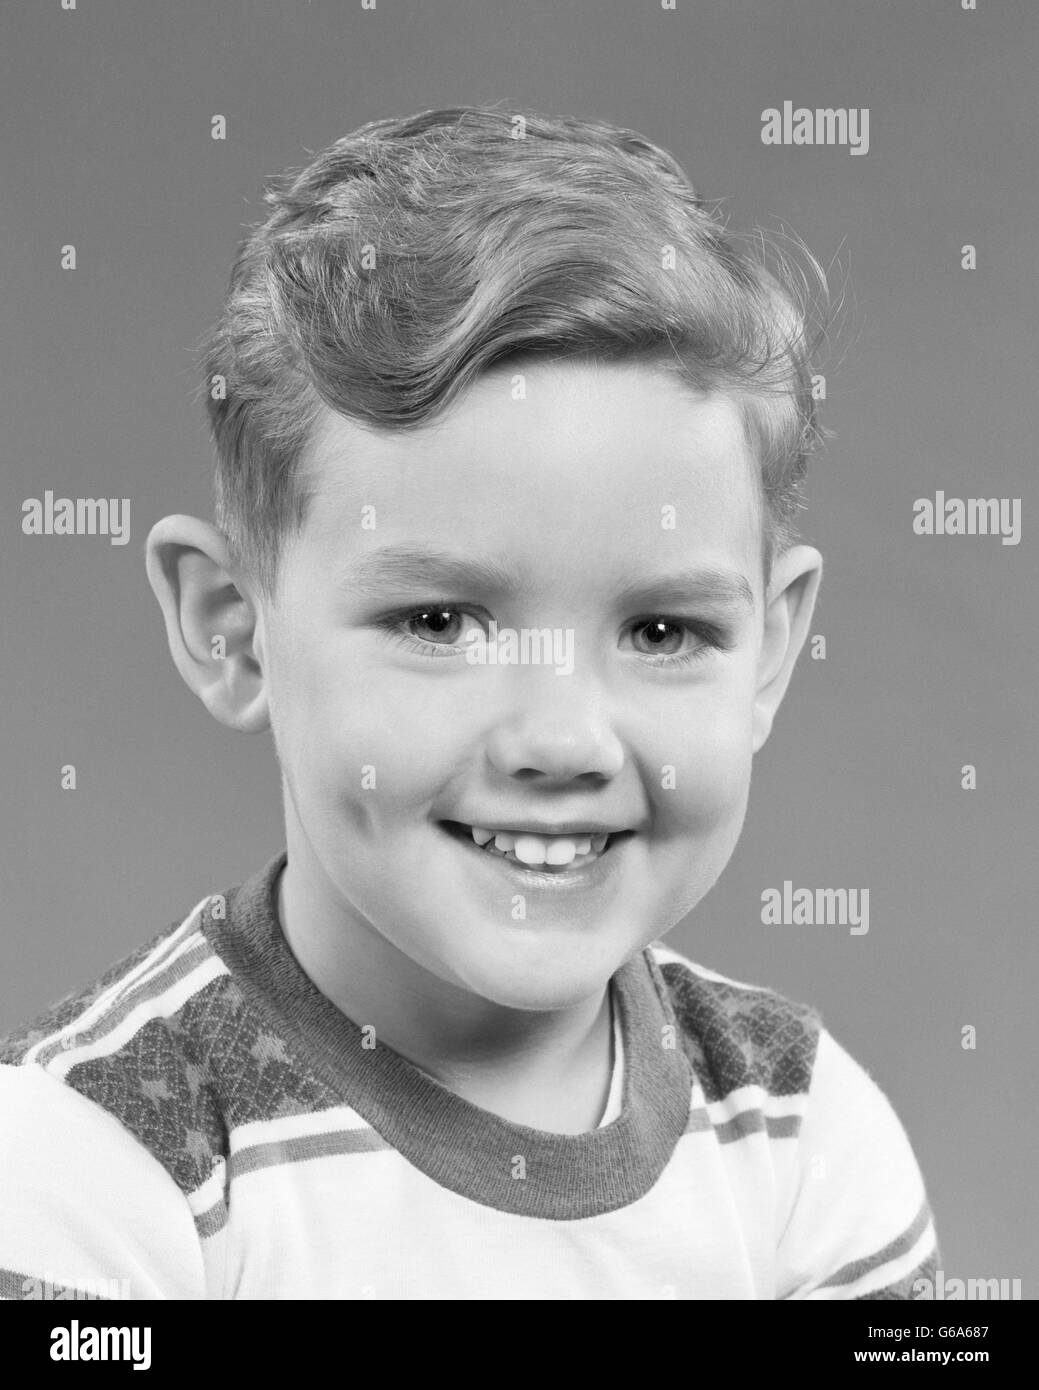 1950 PORTRAIT SMILING BOY LOOKING AT CAMERA WEARING TEE SHIRT RAYÉ Banque D'Images